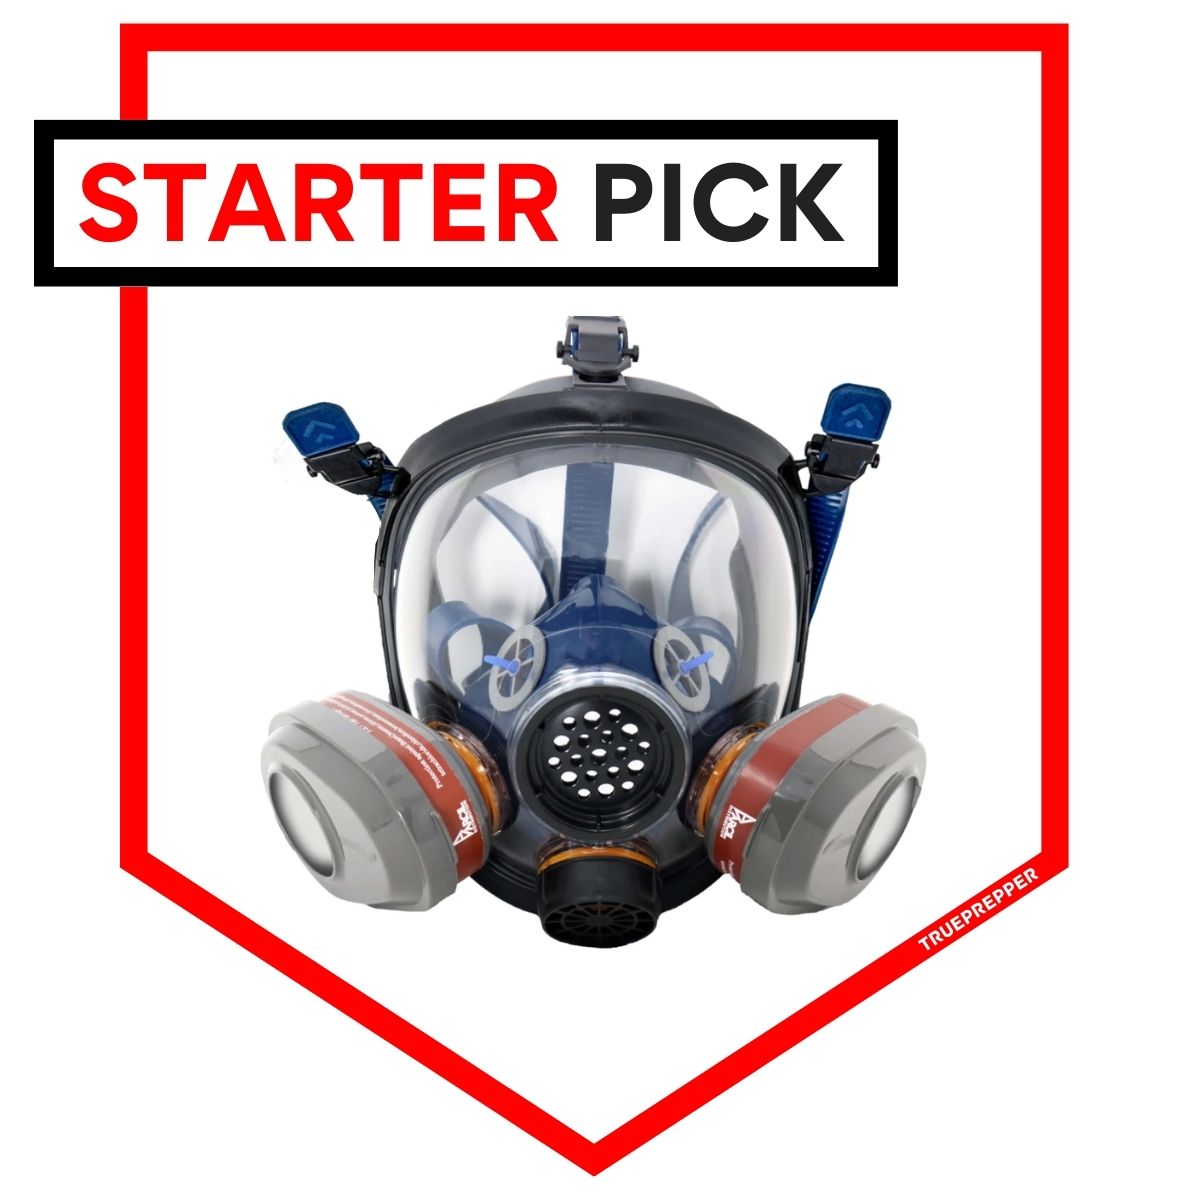 Parcil Safety PD-101 Gas Mask as the Industrial Pick